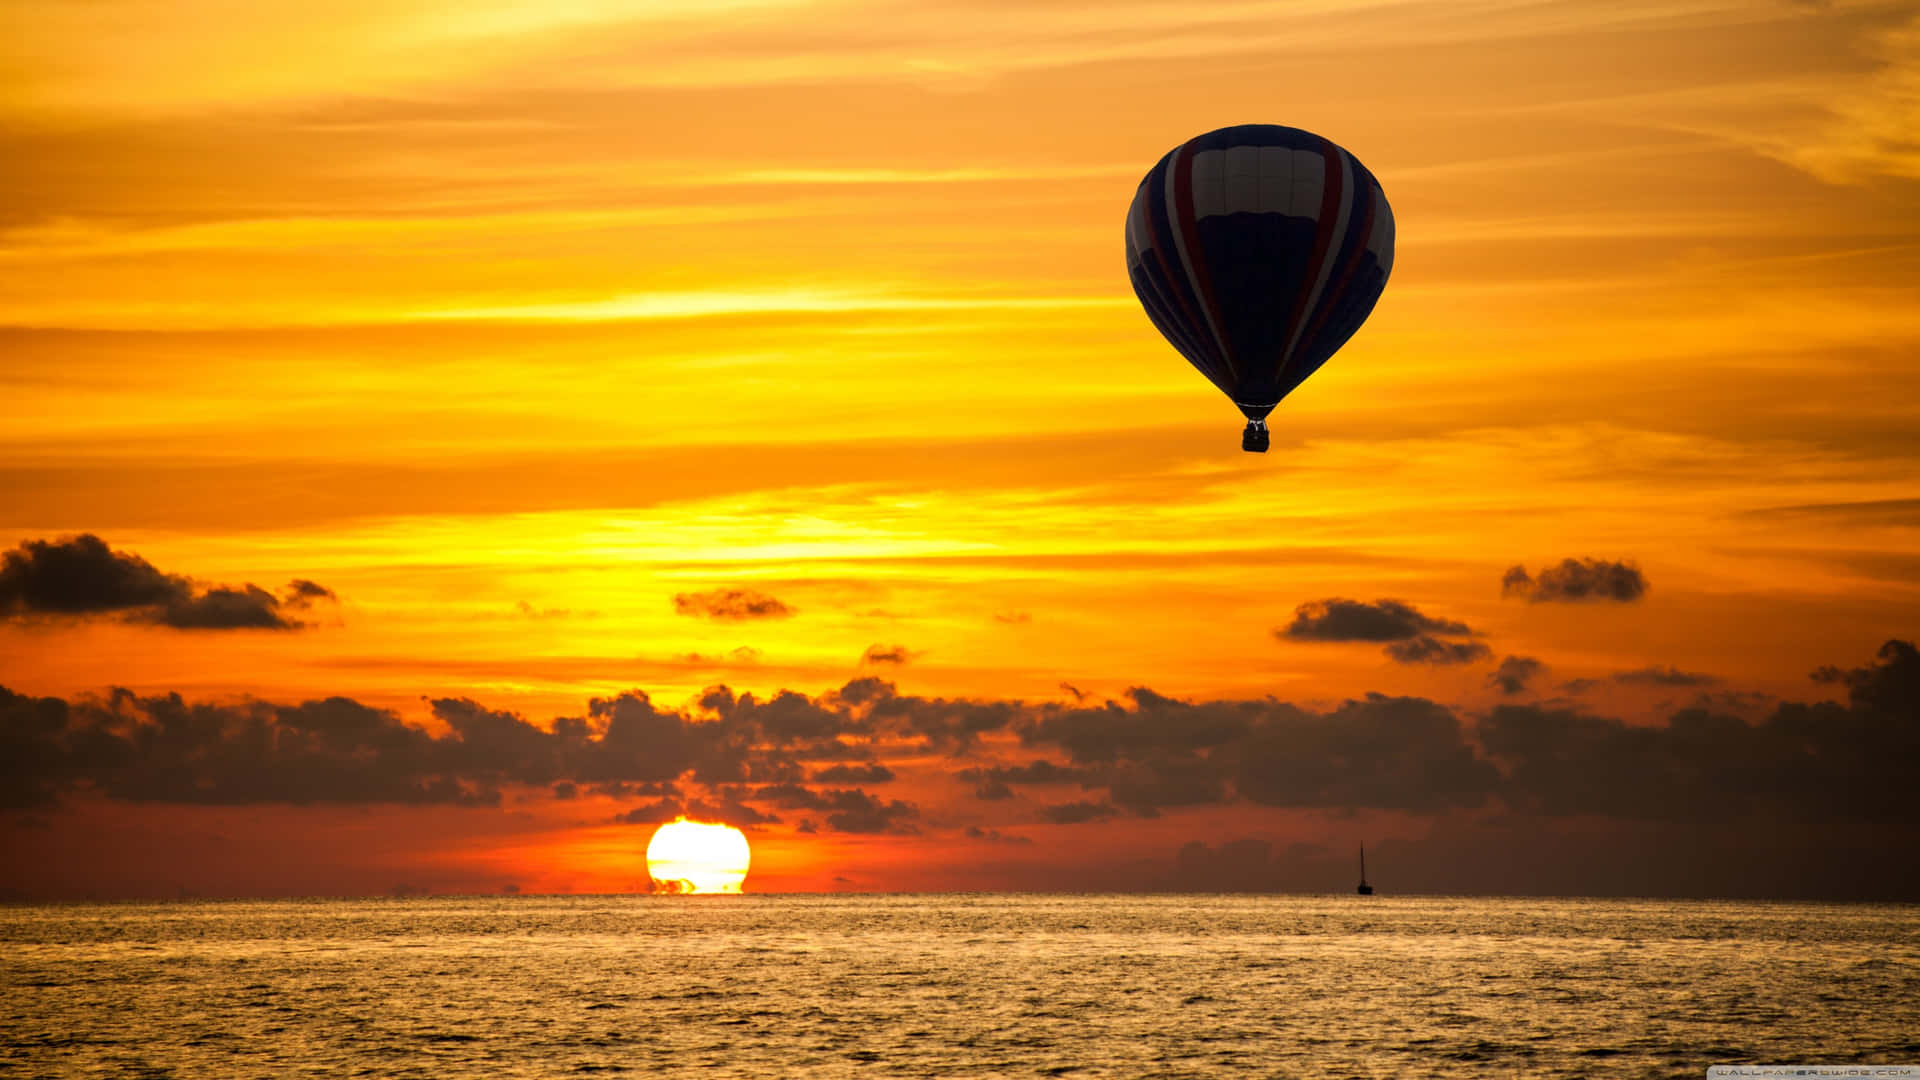 A Hot Air Balloon Flying Over The Ocean At Sunset